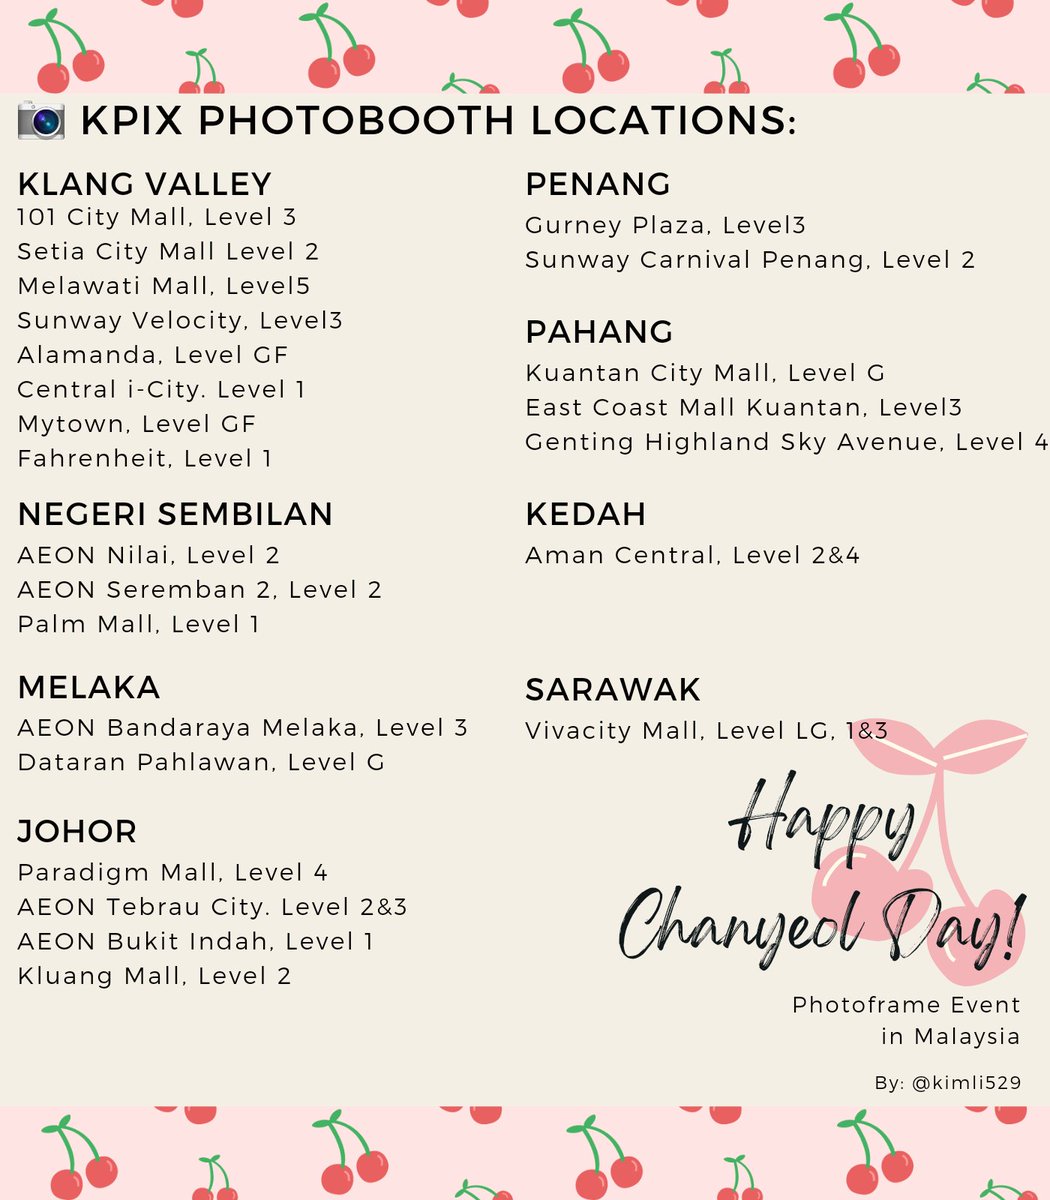 ✨🐾LOEY DAY 2023 👑🍒

Chanyeol Birthday
Photoframe event

📍: Kpix Studio @kpixphotobooth
📆: 18 Nov - 2 Dec 2023
🎨: @11270208_

Share your moments with using these hashtags 
#HAPPYCHANYEOLDAY
#항상찬열이편
Feel free to tag me too ^^

#여리에게ㅇㅍㅇ #찬열 #CHANYEOL